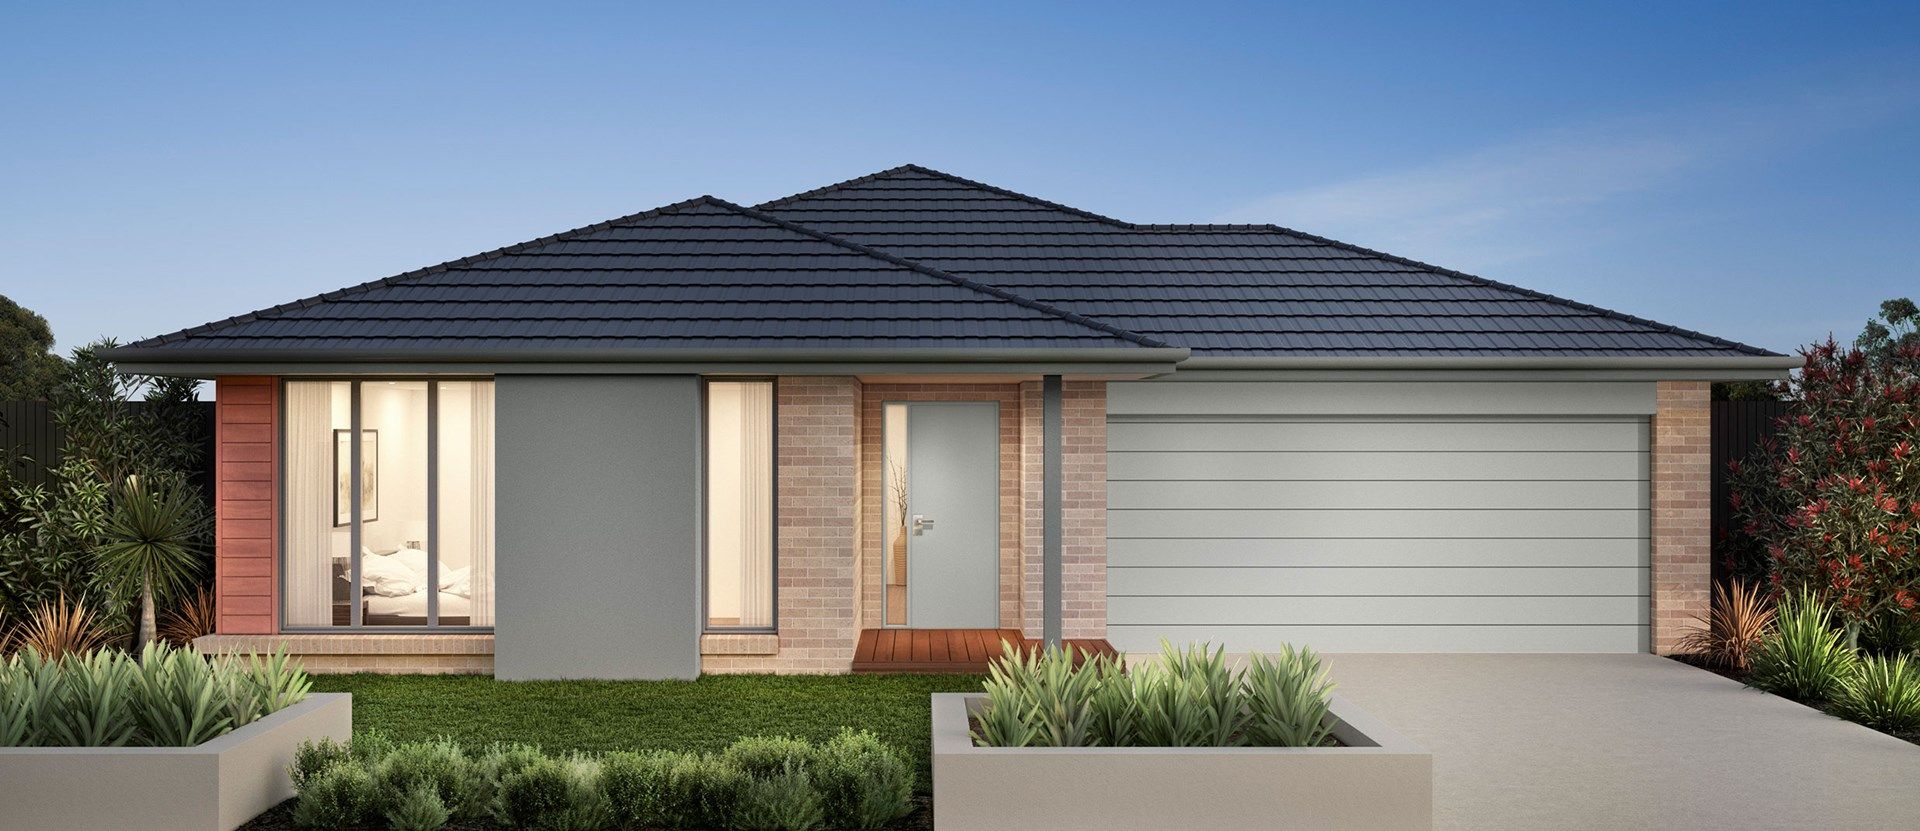 Foxfort Street, Lot: 2629, Clyde North VIC 3978, Image 0